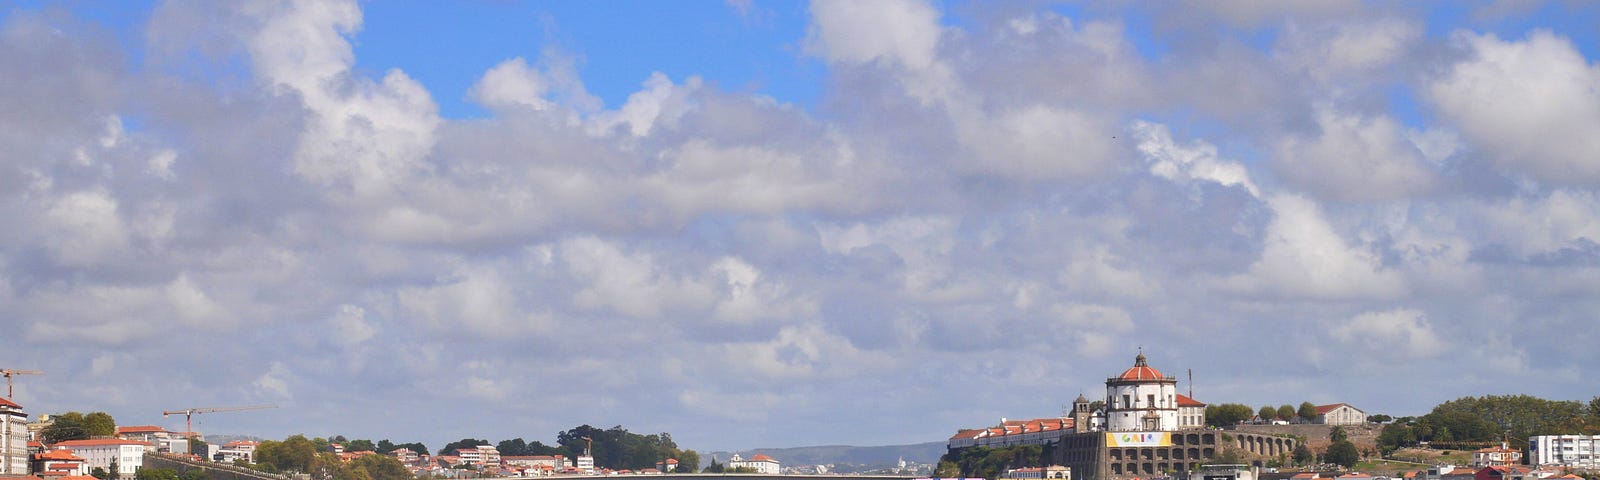 Someplace in Portugal, with a bridge, beautiful terra cotta roofs, and fluffy clouds